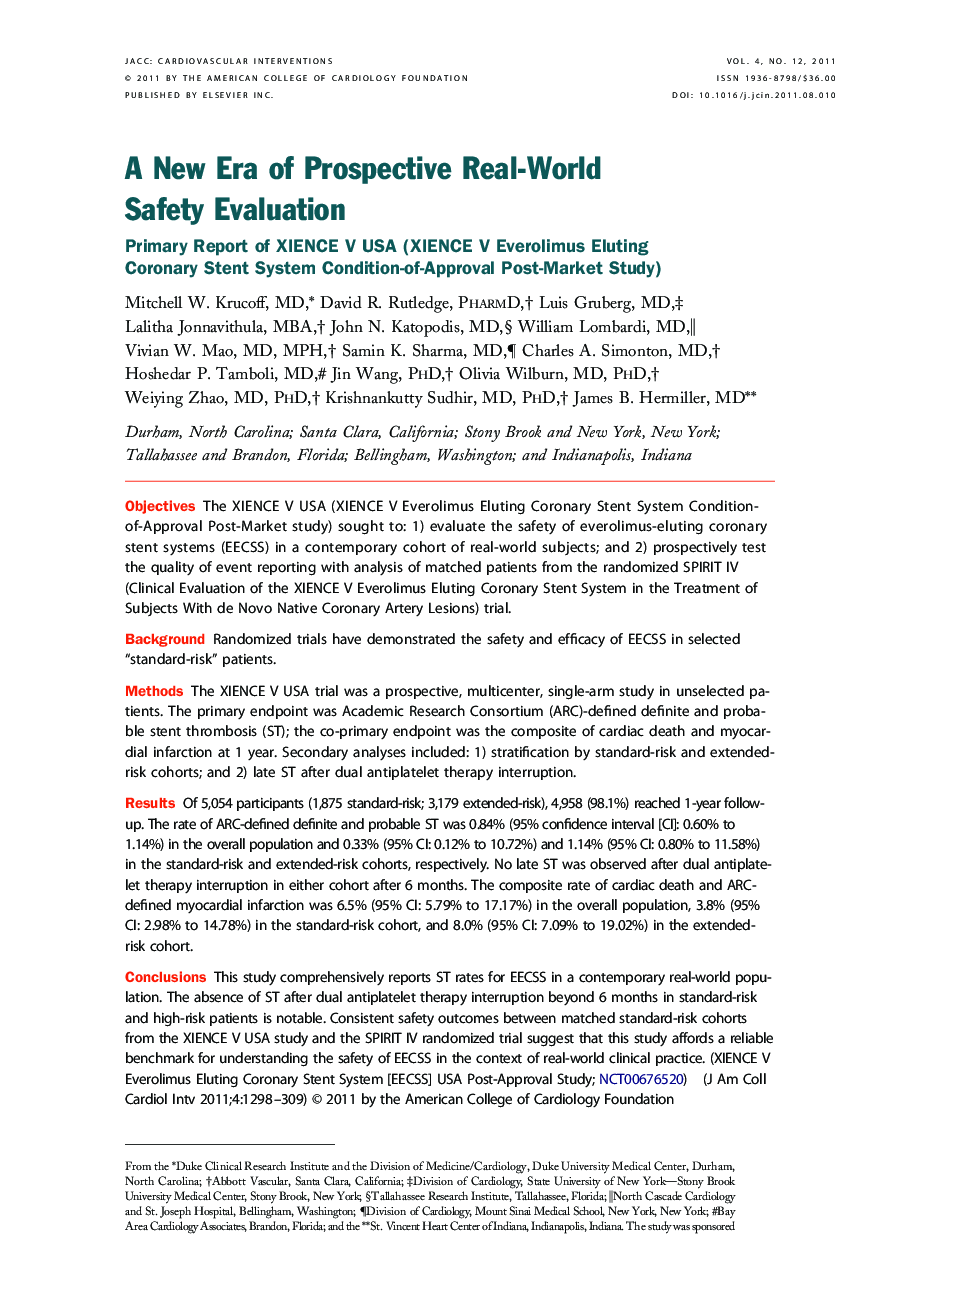 A New Era of Prospective Real-World Safety Evaluation : Primary Report of XIENCE V USA (XIENCE V Everolimus Eluting Coronary Stent System Condition-of-Approval Post-Market Study)